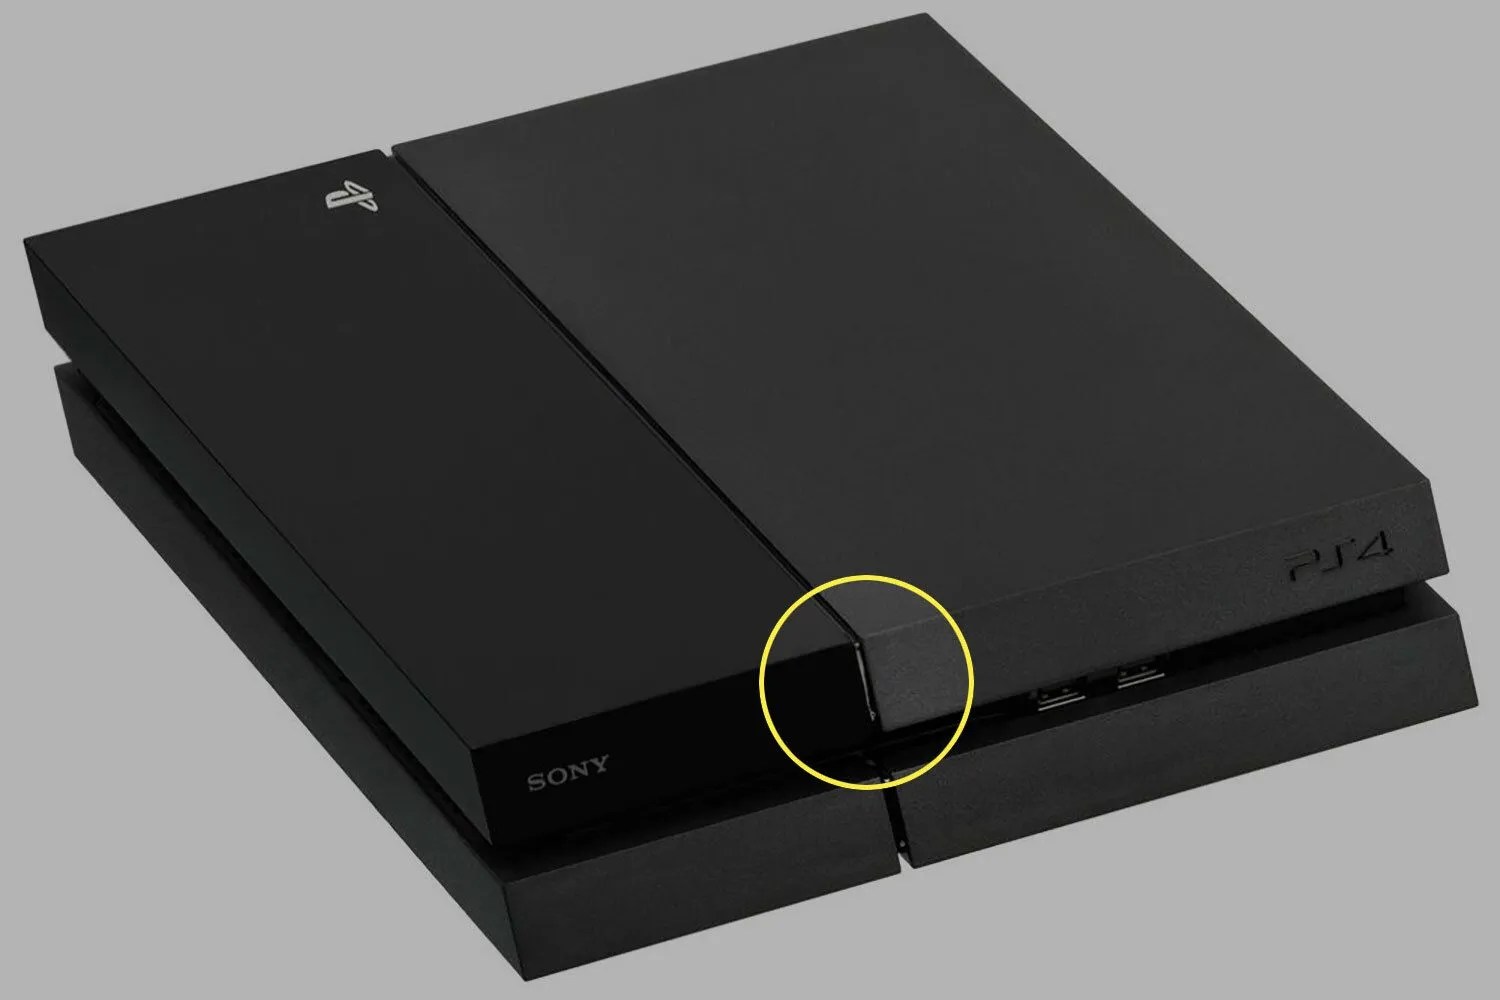 How to Fix a PS4 That Keeps Turning Off by Itself